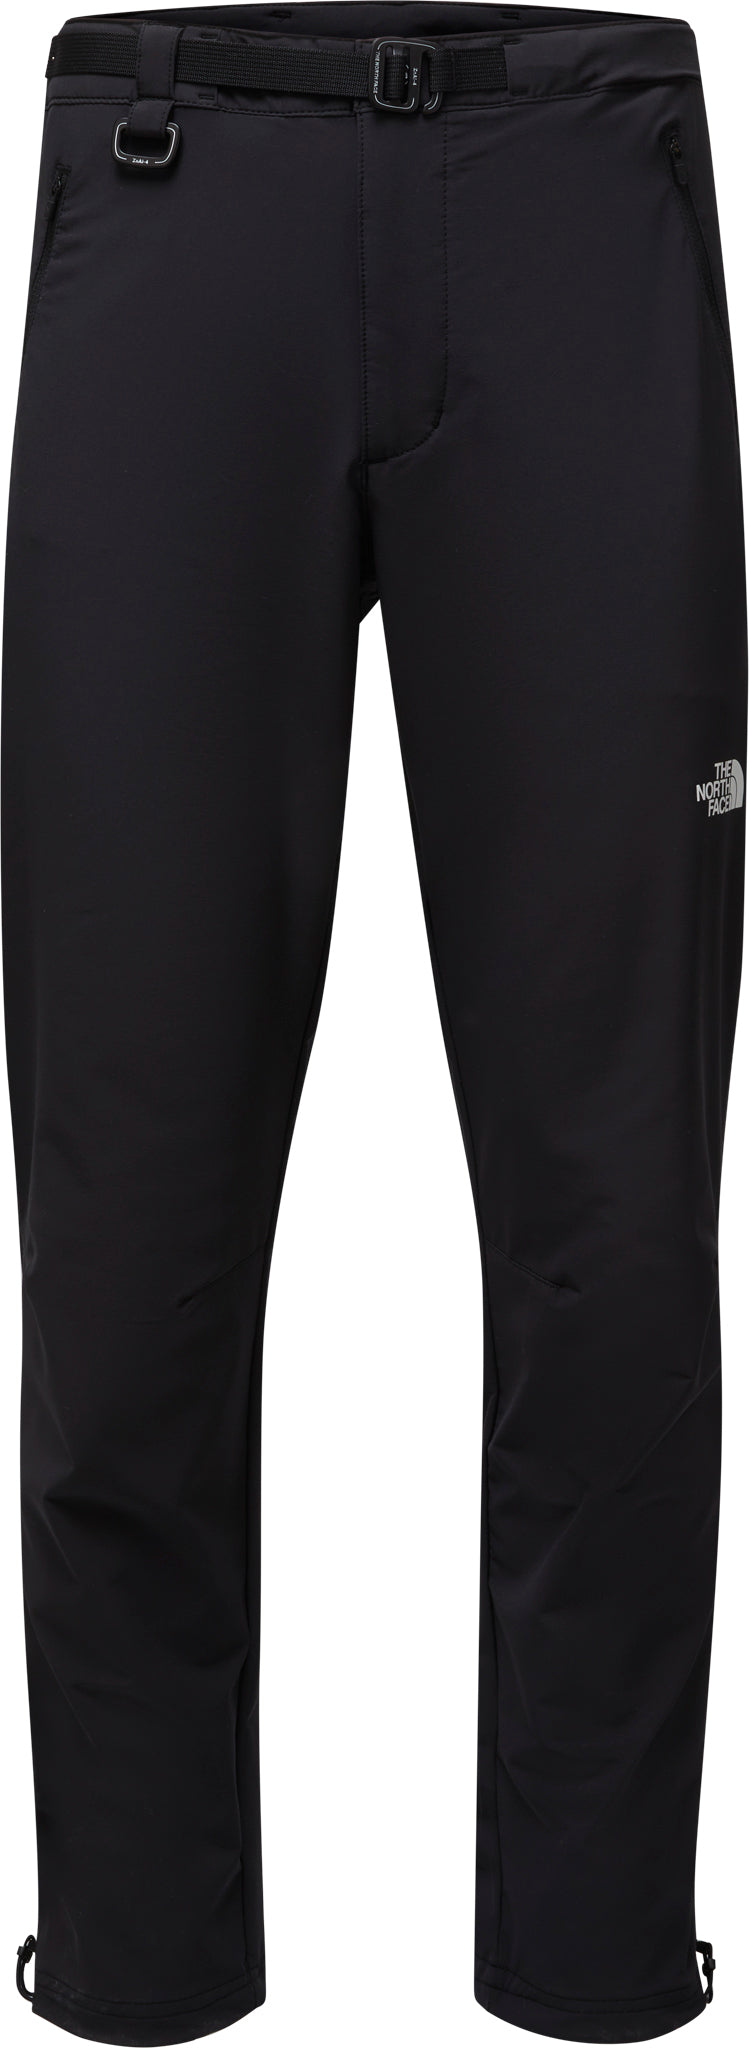 The North Face Paramount Pro Pant - Men's | Altitude Sports